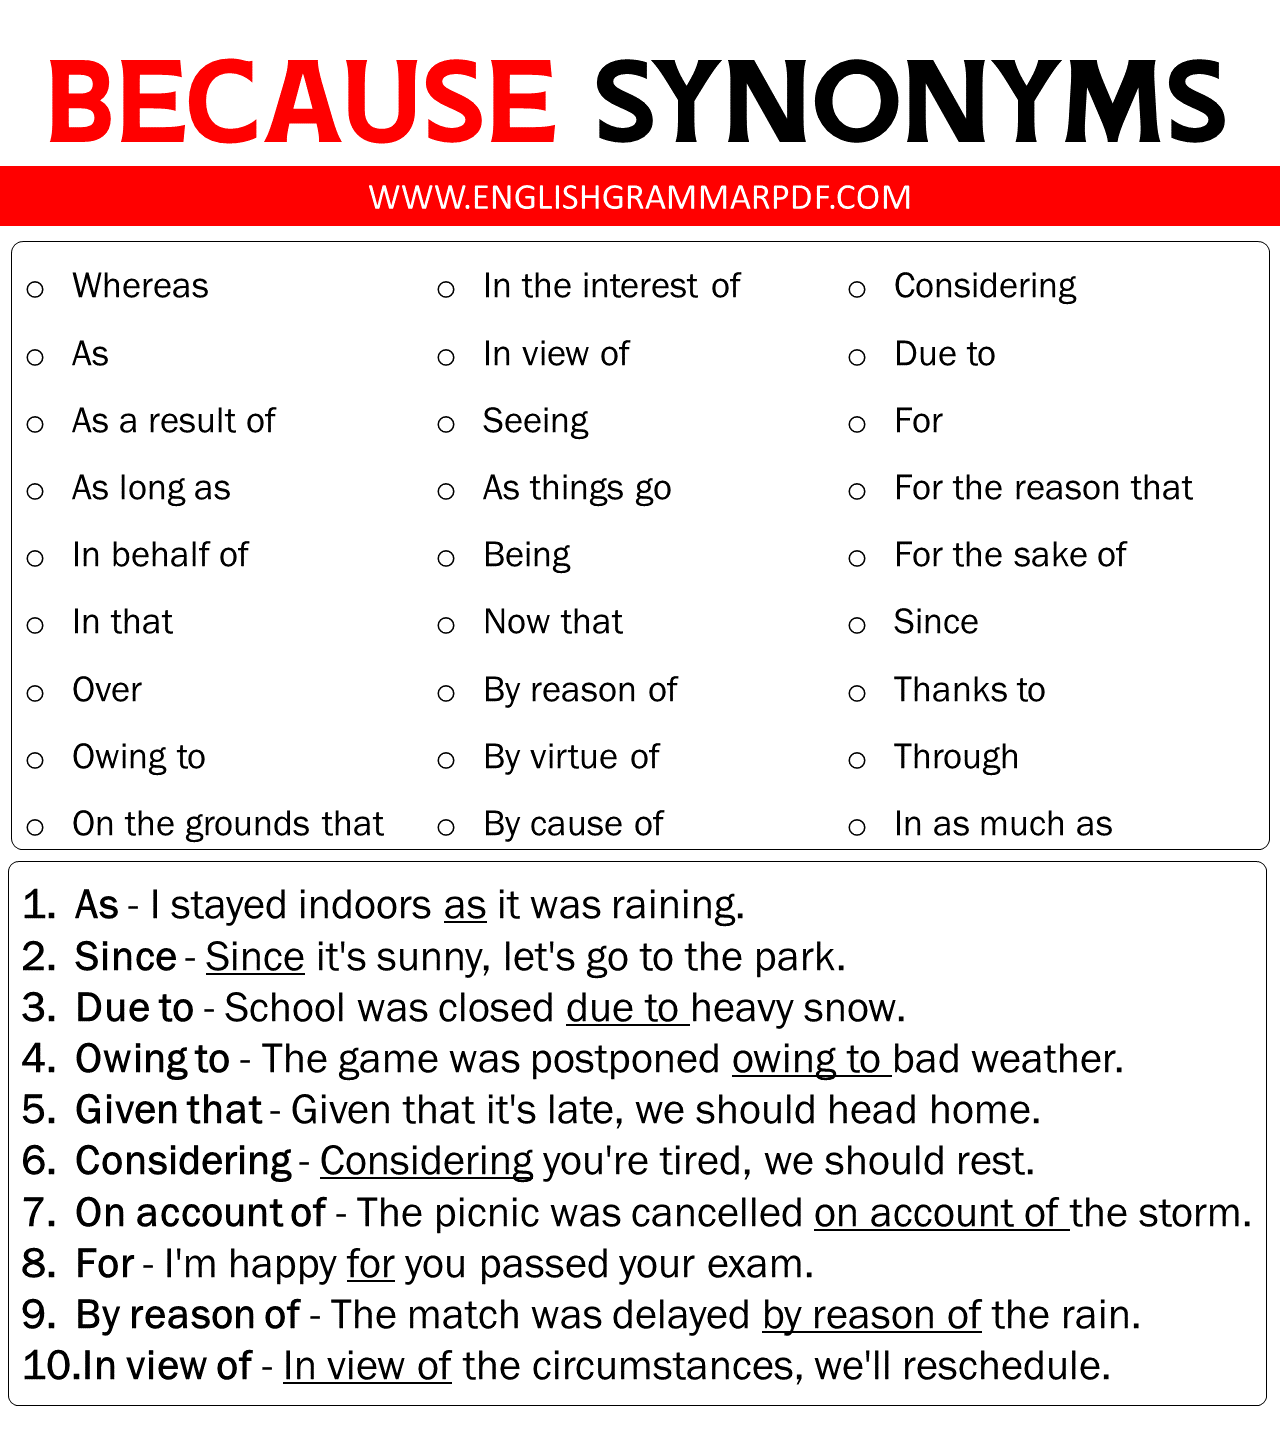 BECAUSE Synonyms